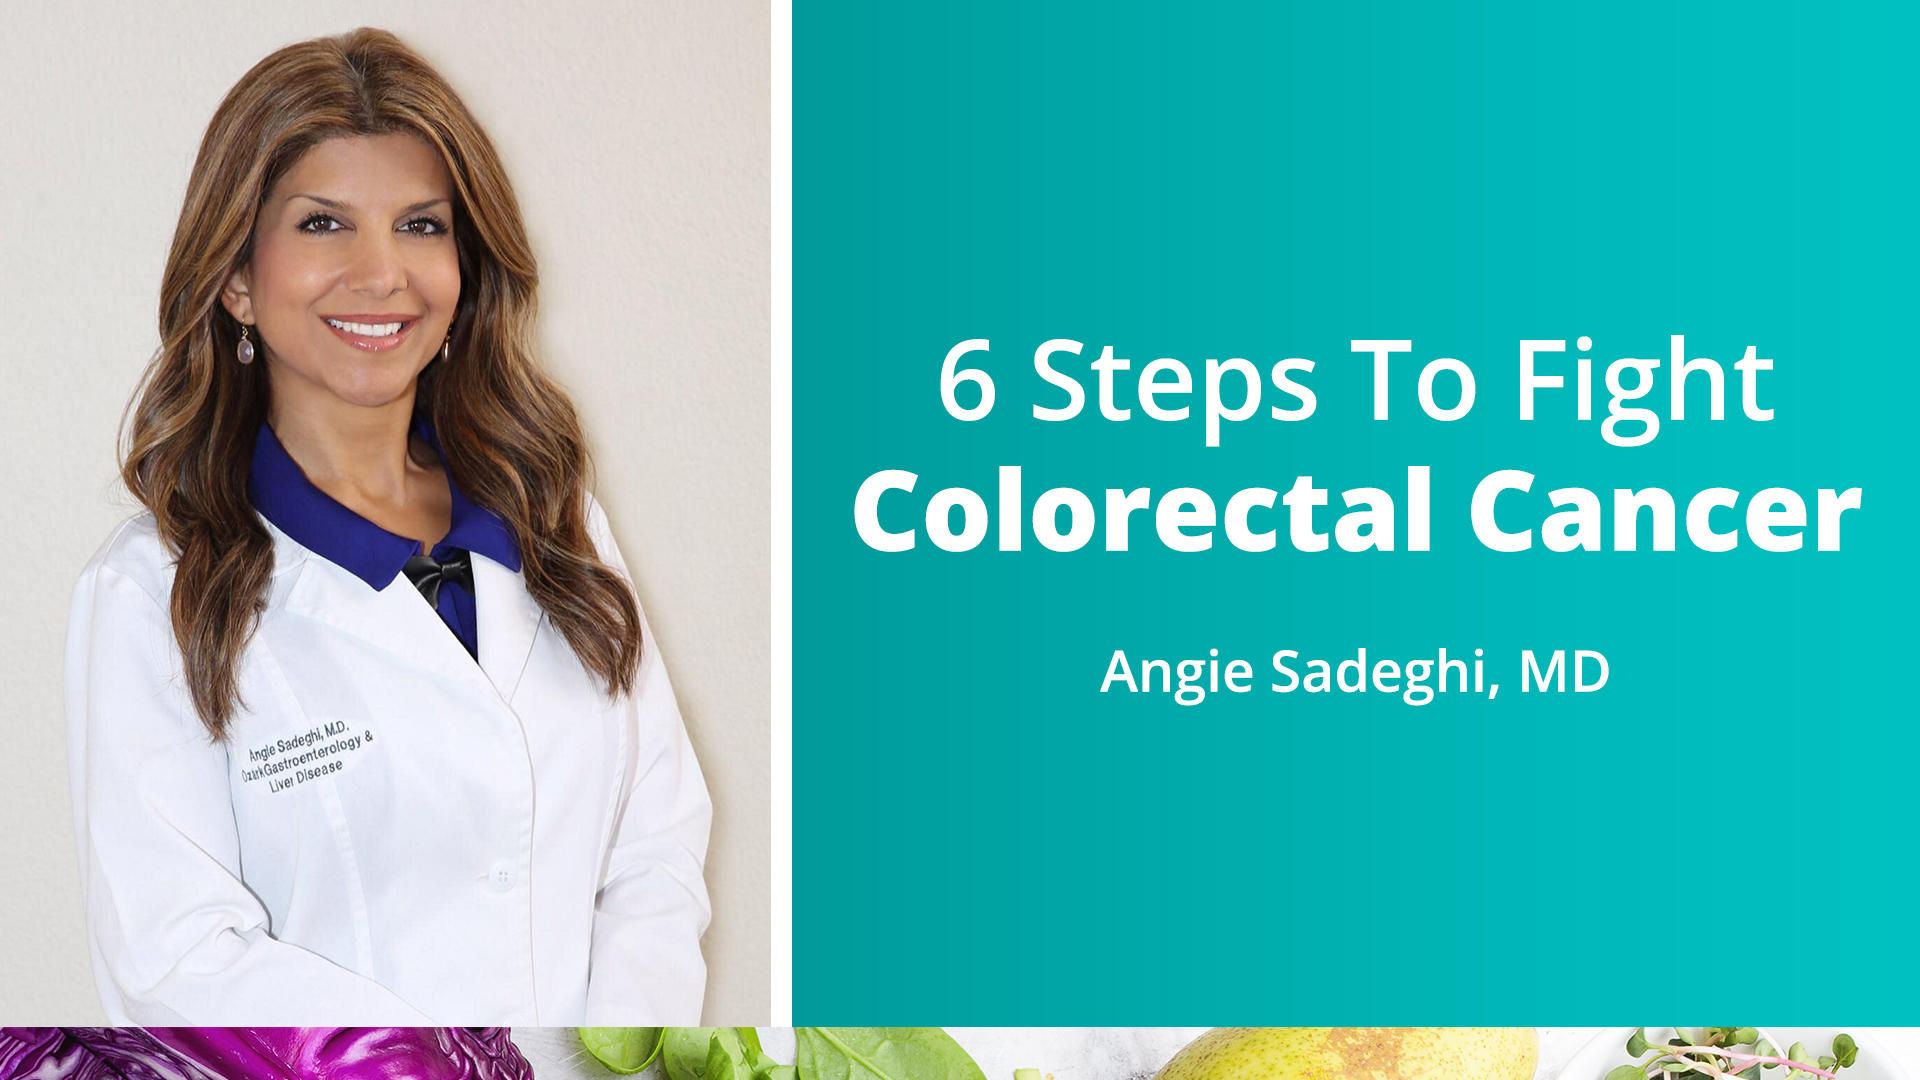 6 Ways To Fight Colorectal Cancer